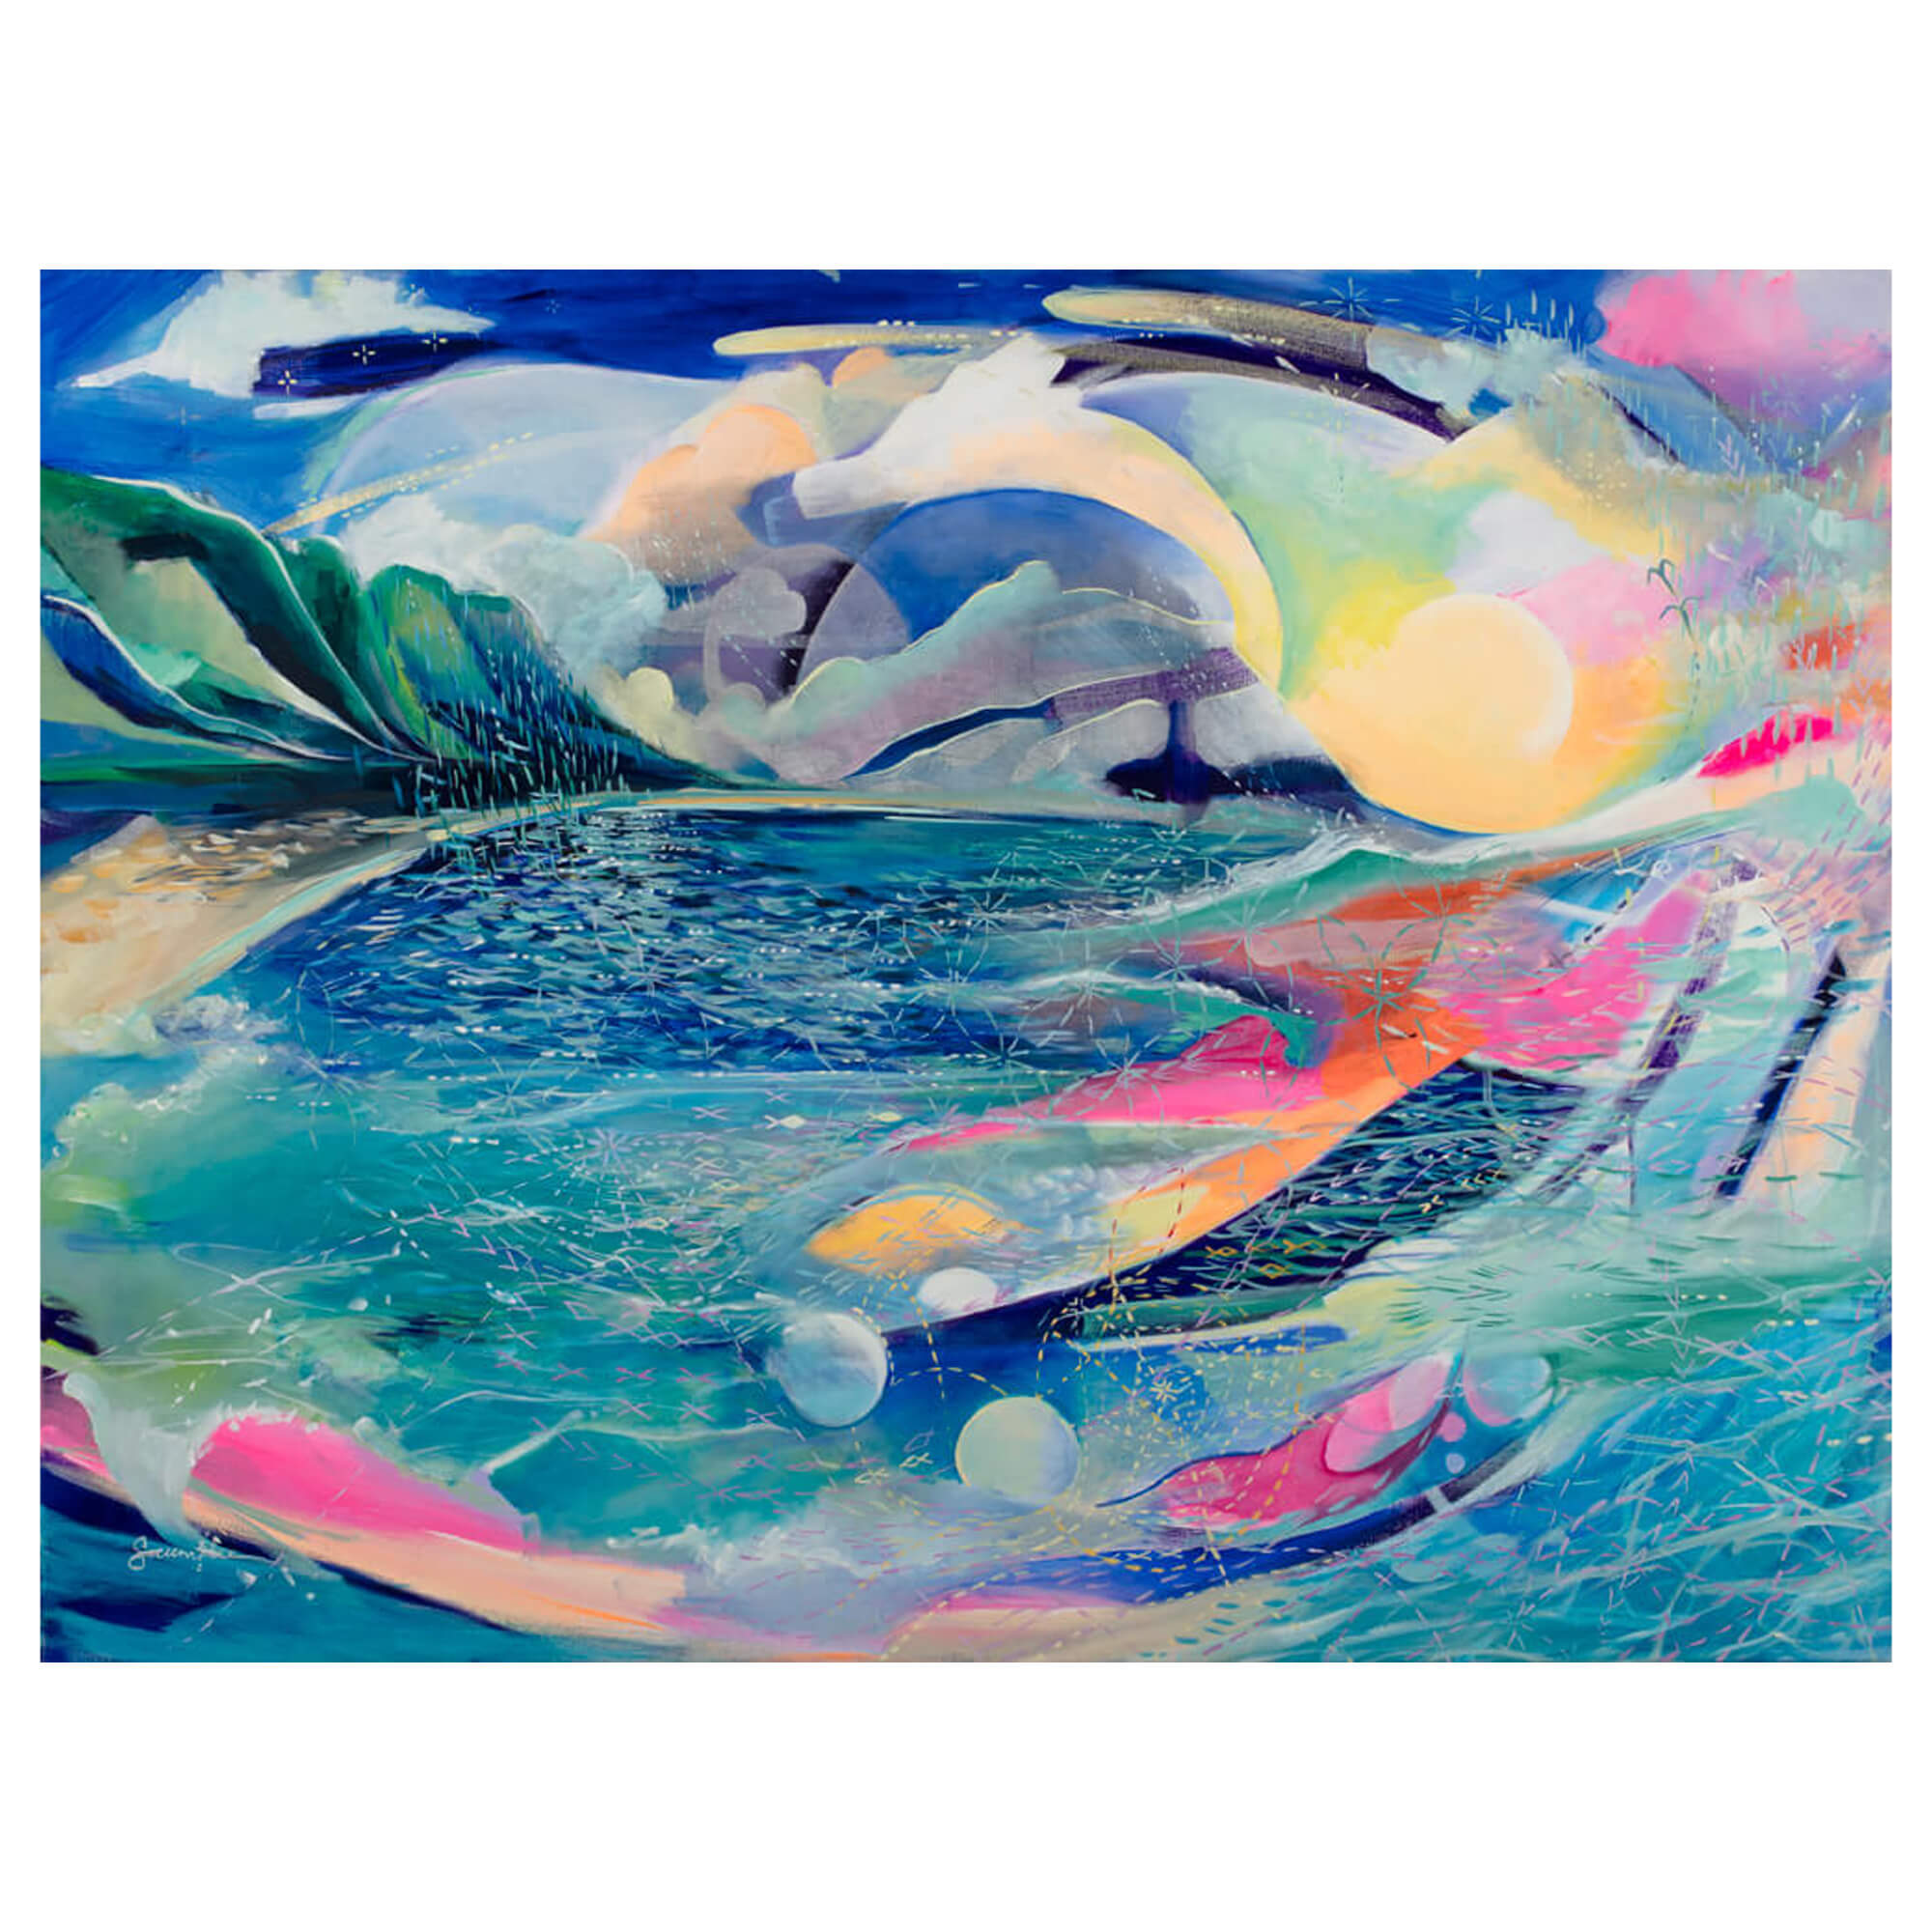 A matted art print of an abstract artwork of a seascape with vibrant pastel colors Hawaii artist Saumolia Puapuaga